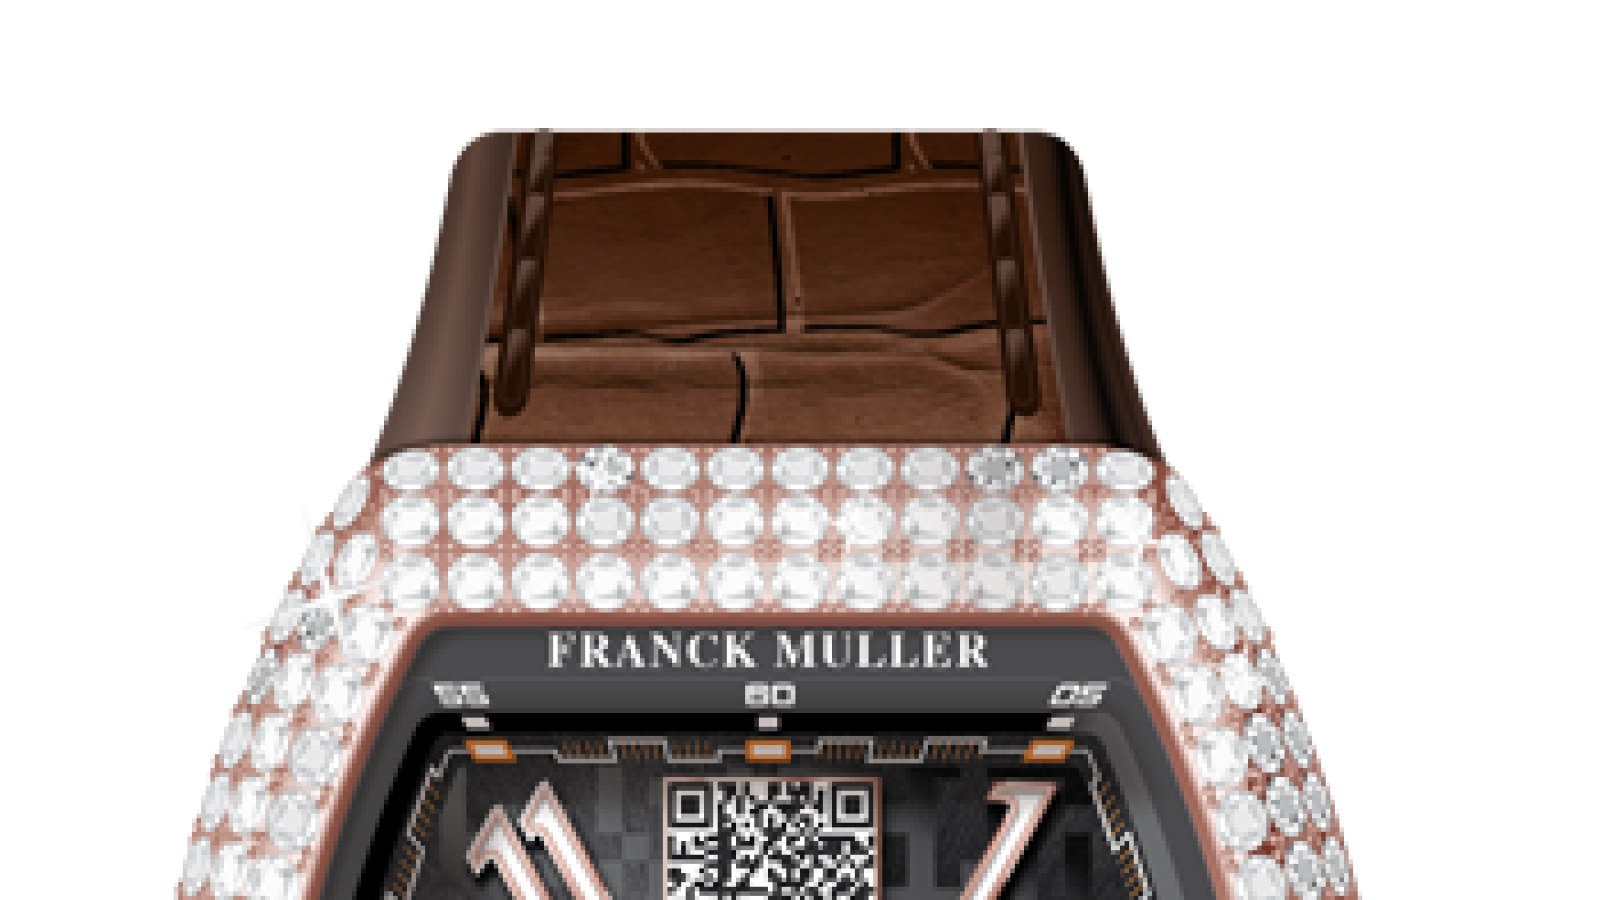 The most expensive Franck Muller ‘crypto’ watch